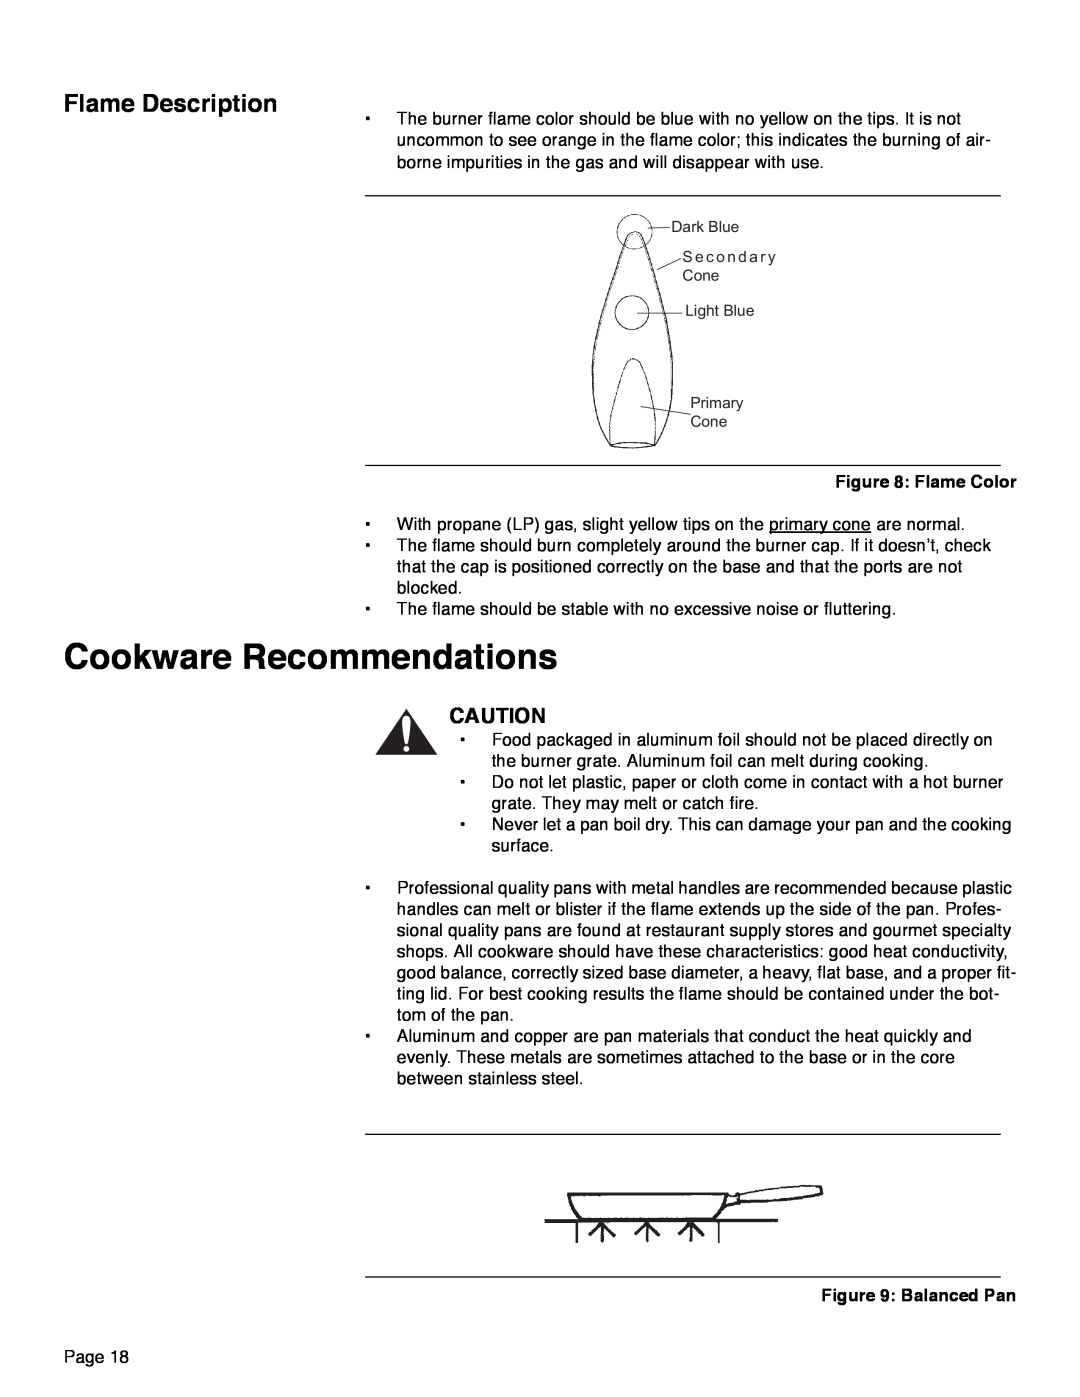 Thermador PRD48, PRD36, PRD30 manual Cookware Recommendations, Flame Description 